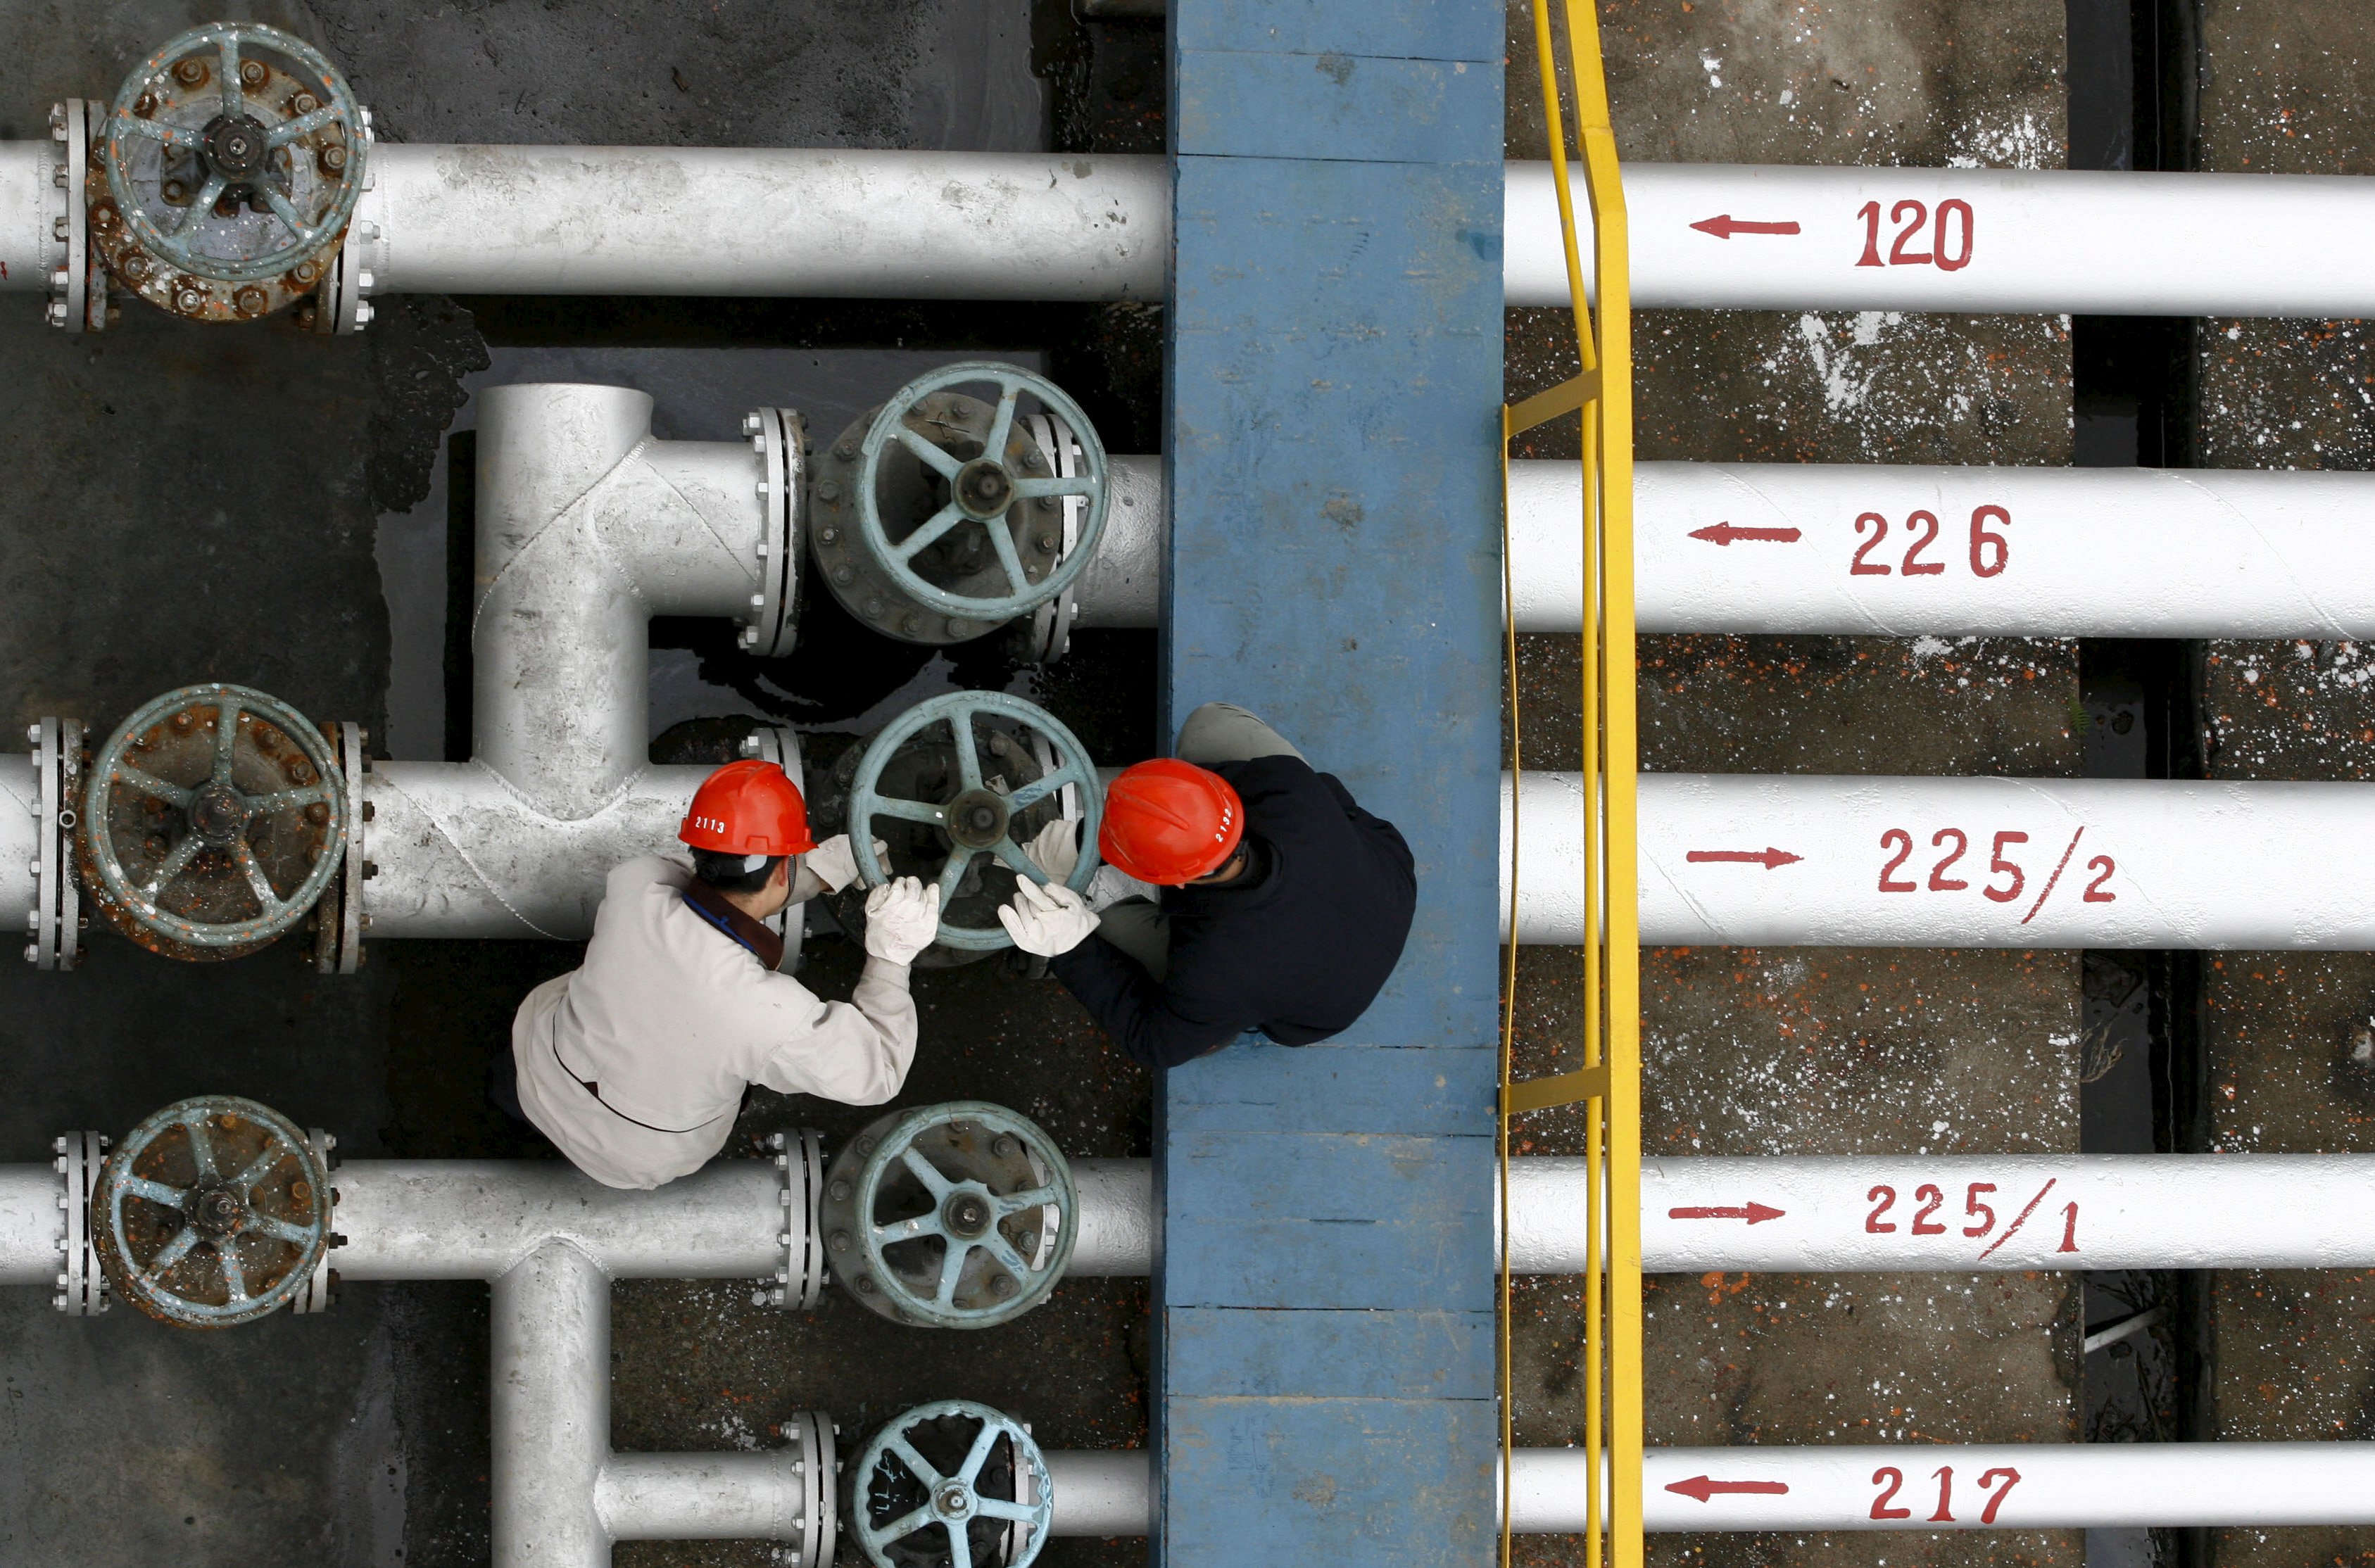 Labourers work at a refinery in Jingmen, in central China's Hubei province, in this December 8, 2006 file photo. Iran's oil sales look to be headed towards a six-month low in September 2015, down 16 percent from August, with tanker loading data showing Tehran is struggling to boost crude exports despite optimism over the landmark deal on its nuclear programme. The OPEC producer has been getting lukewarm responses from Asian buyers to offers of discounts in return for increased purchases as it tries to regain market share lost to rivals such as Saudi Arabia over the last 3-1/2 years of Western sanctions. August and September loadings - for arrivals in September and October - suggest imports by its main buyers in Asia are set to fall a second straight month in September, due to a seasonal drop in demand at the end of summer and as China takes its lowest volume of Iranian crude in nearly a year. REUTERS/Stringer/FilesCHINA OUT. NO COMMERCIAL OR EDITORIAL SALES IN CHINA